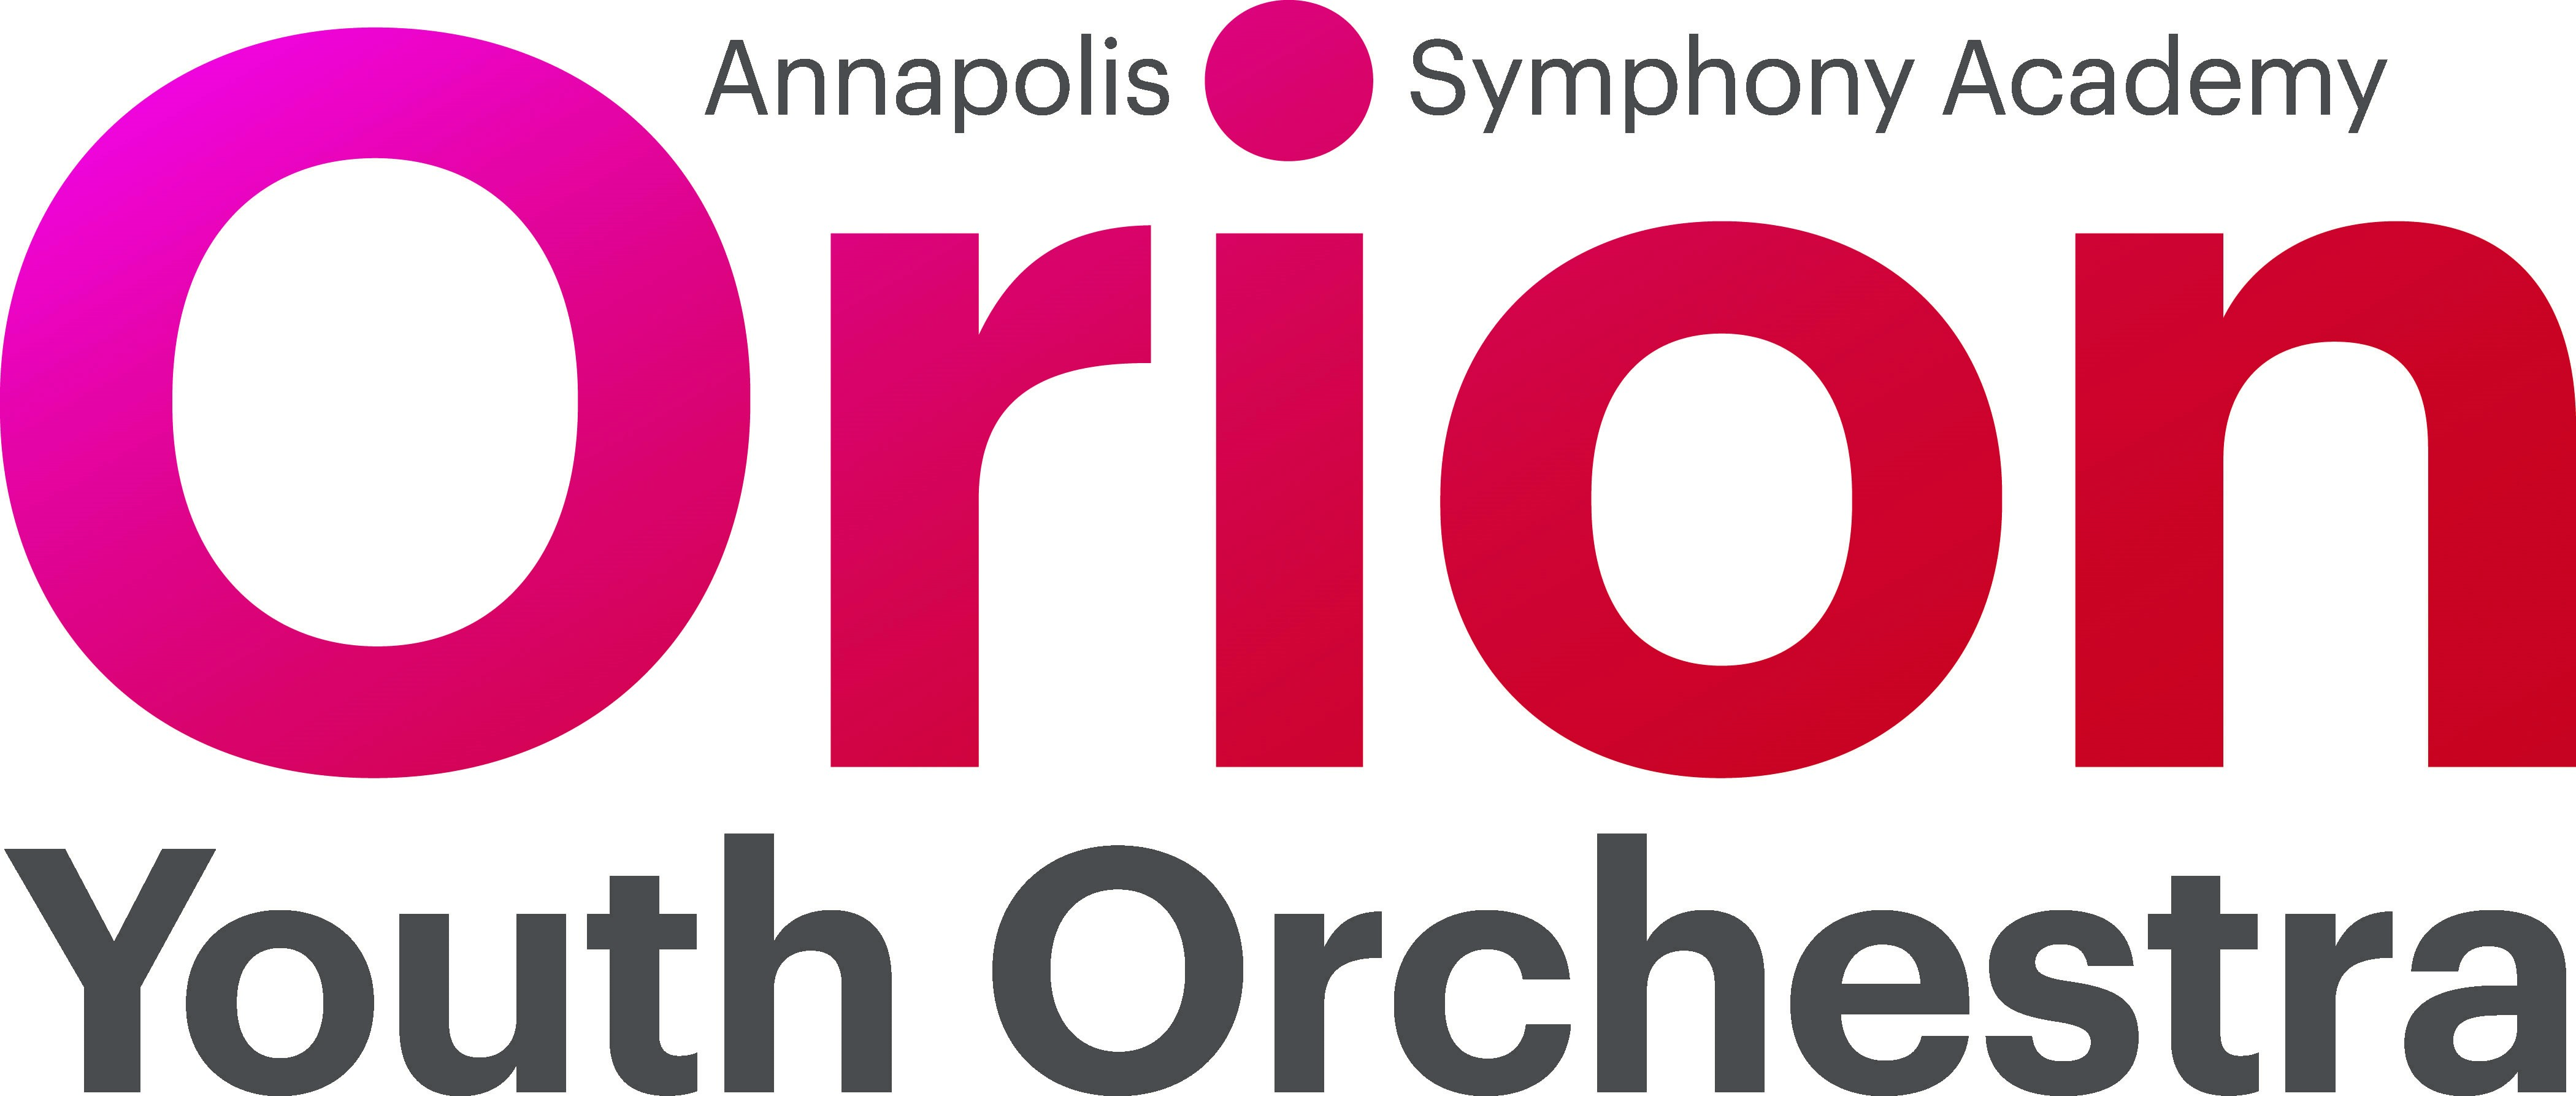 Image for Orion Youth Orchestra